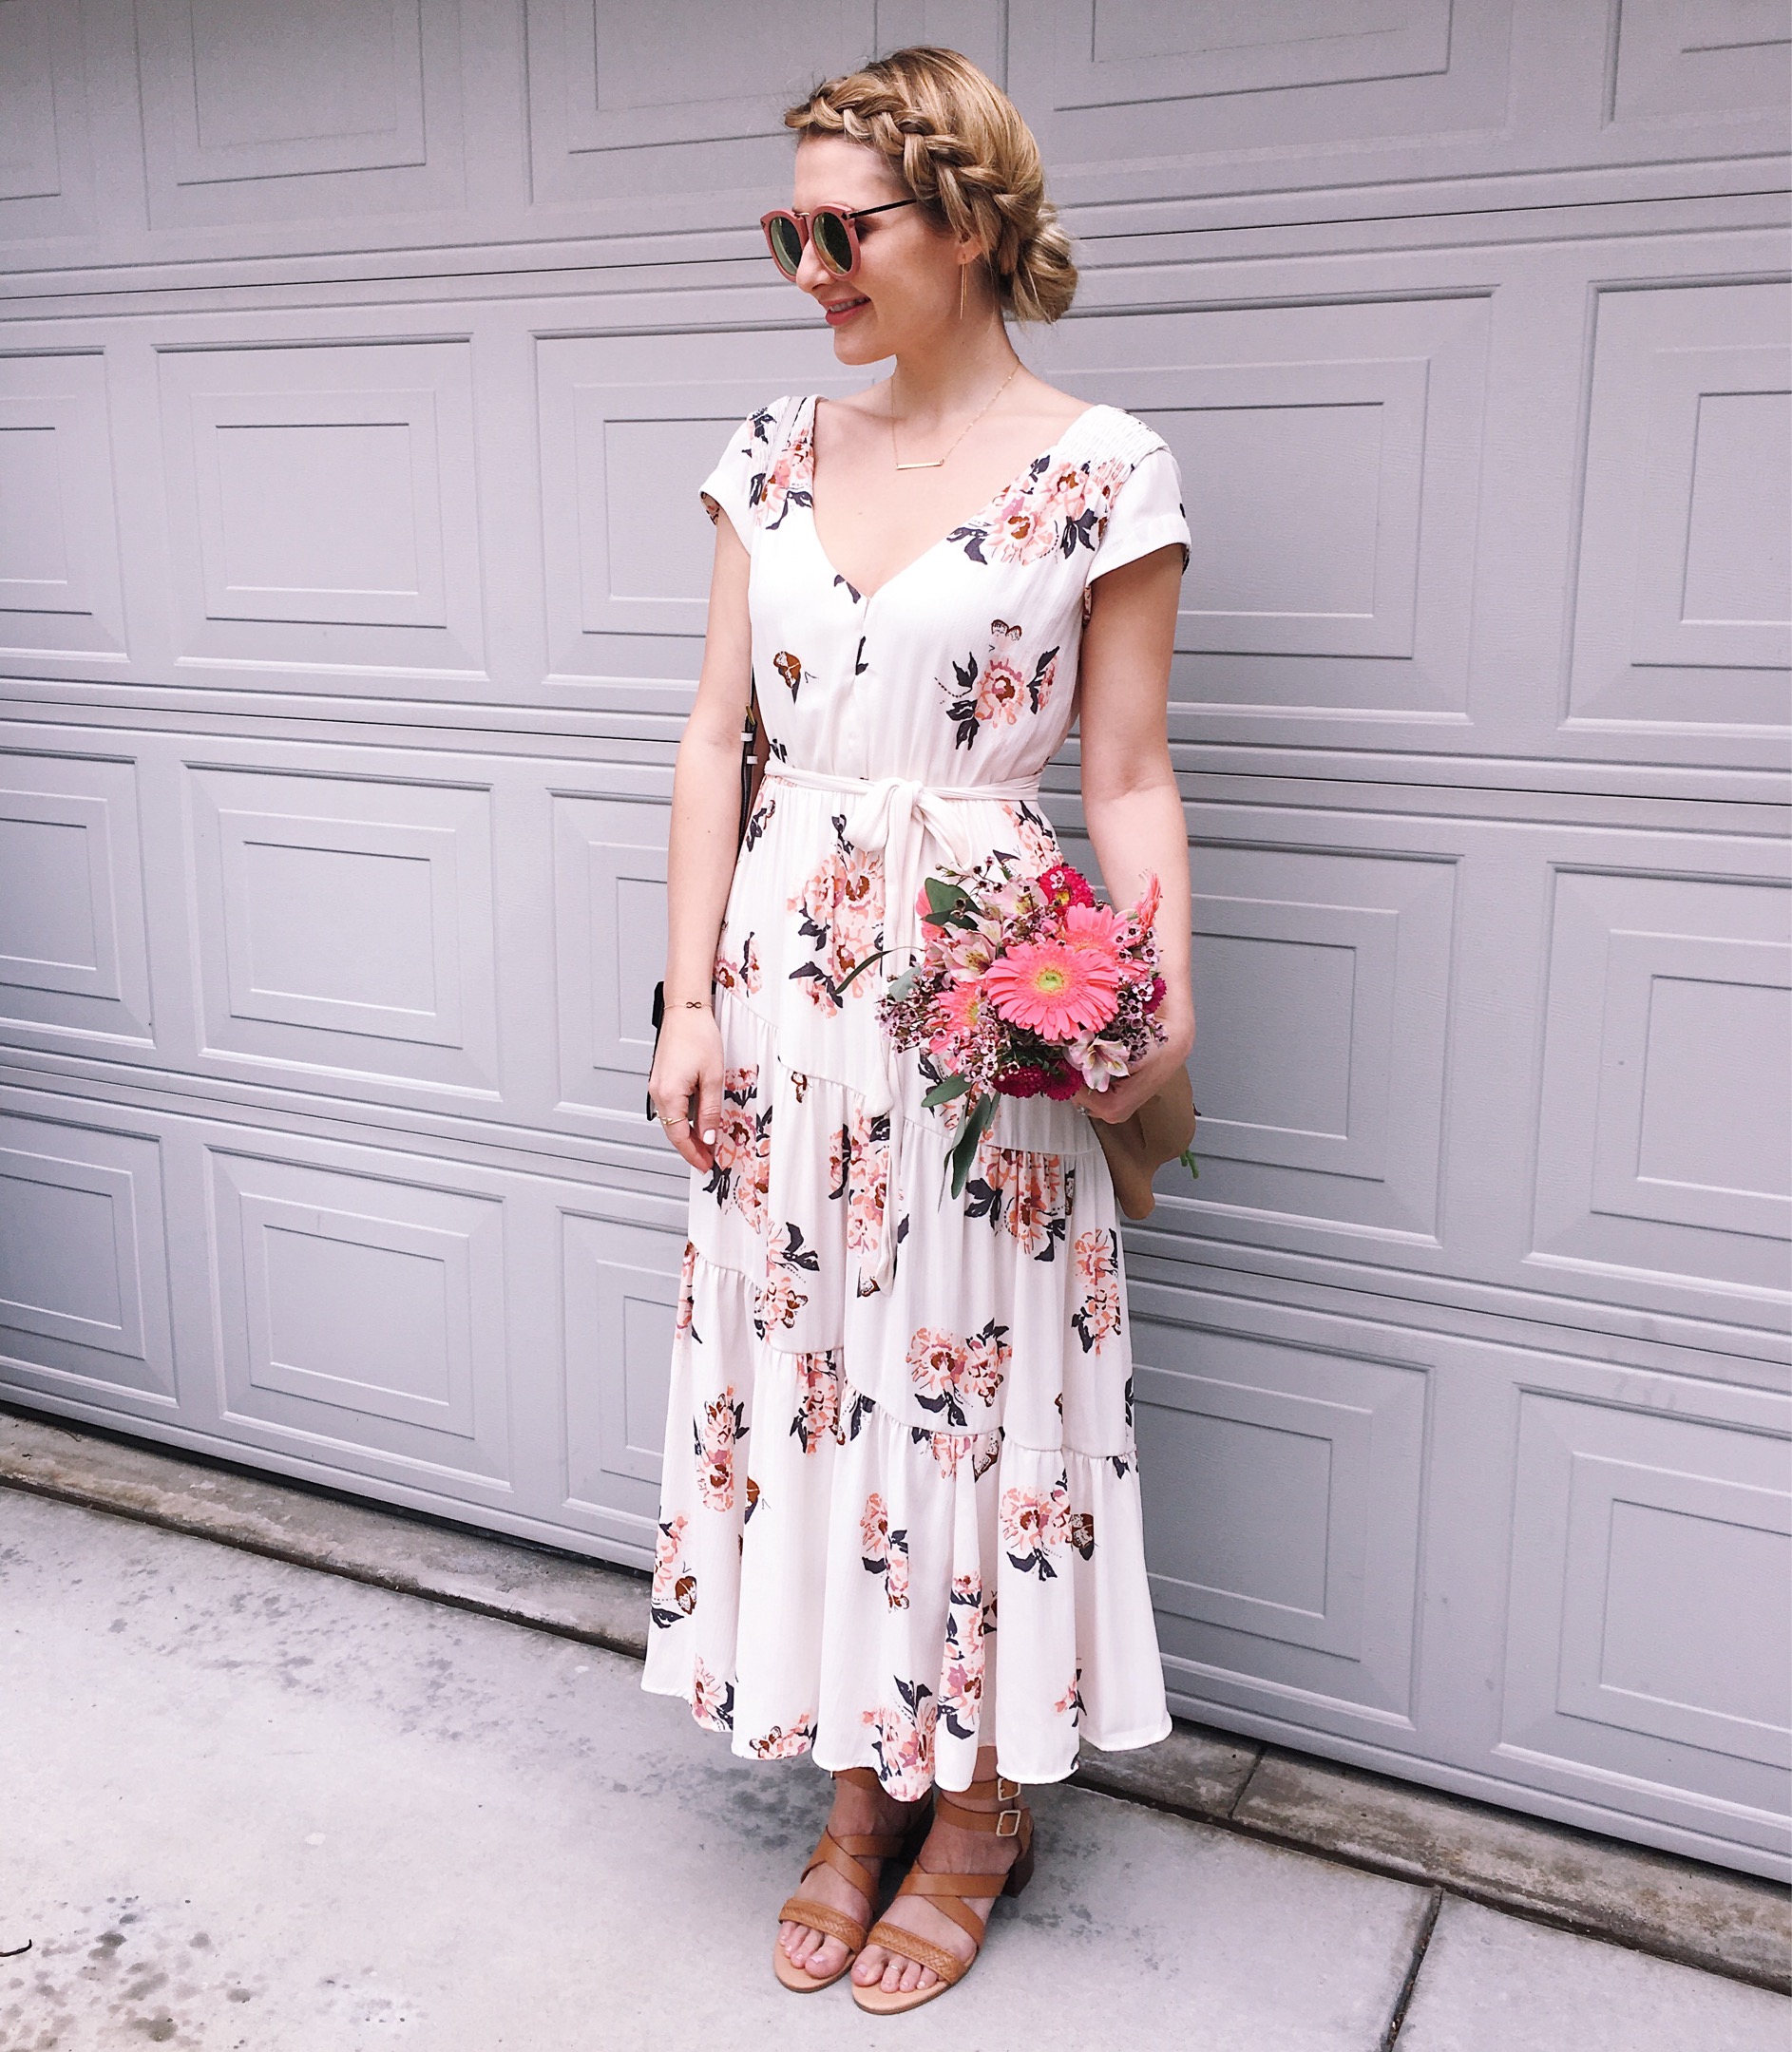 best spring dresses under $100 by popular Chicago fashion blogger Visions of Vogue